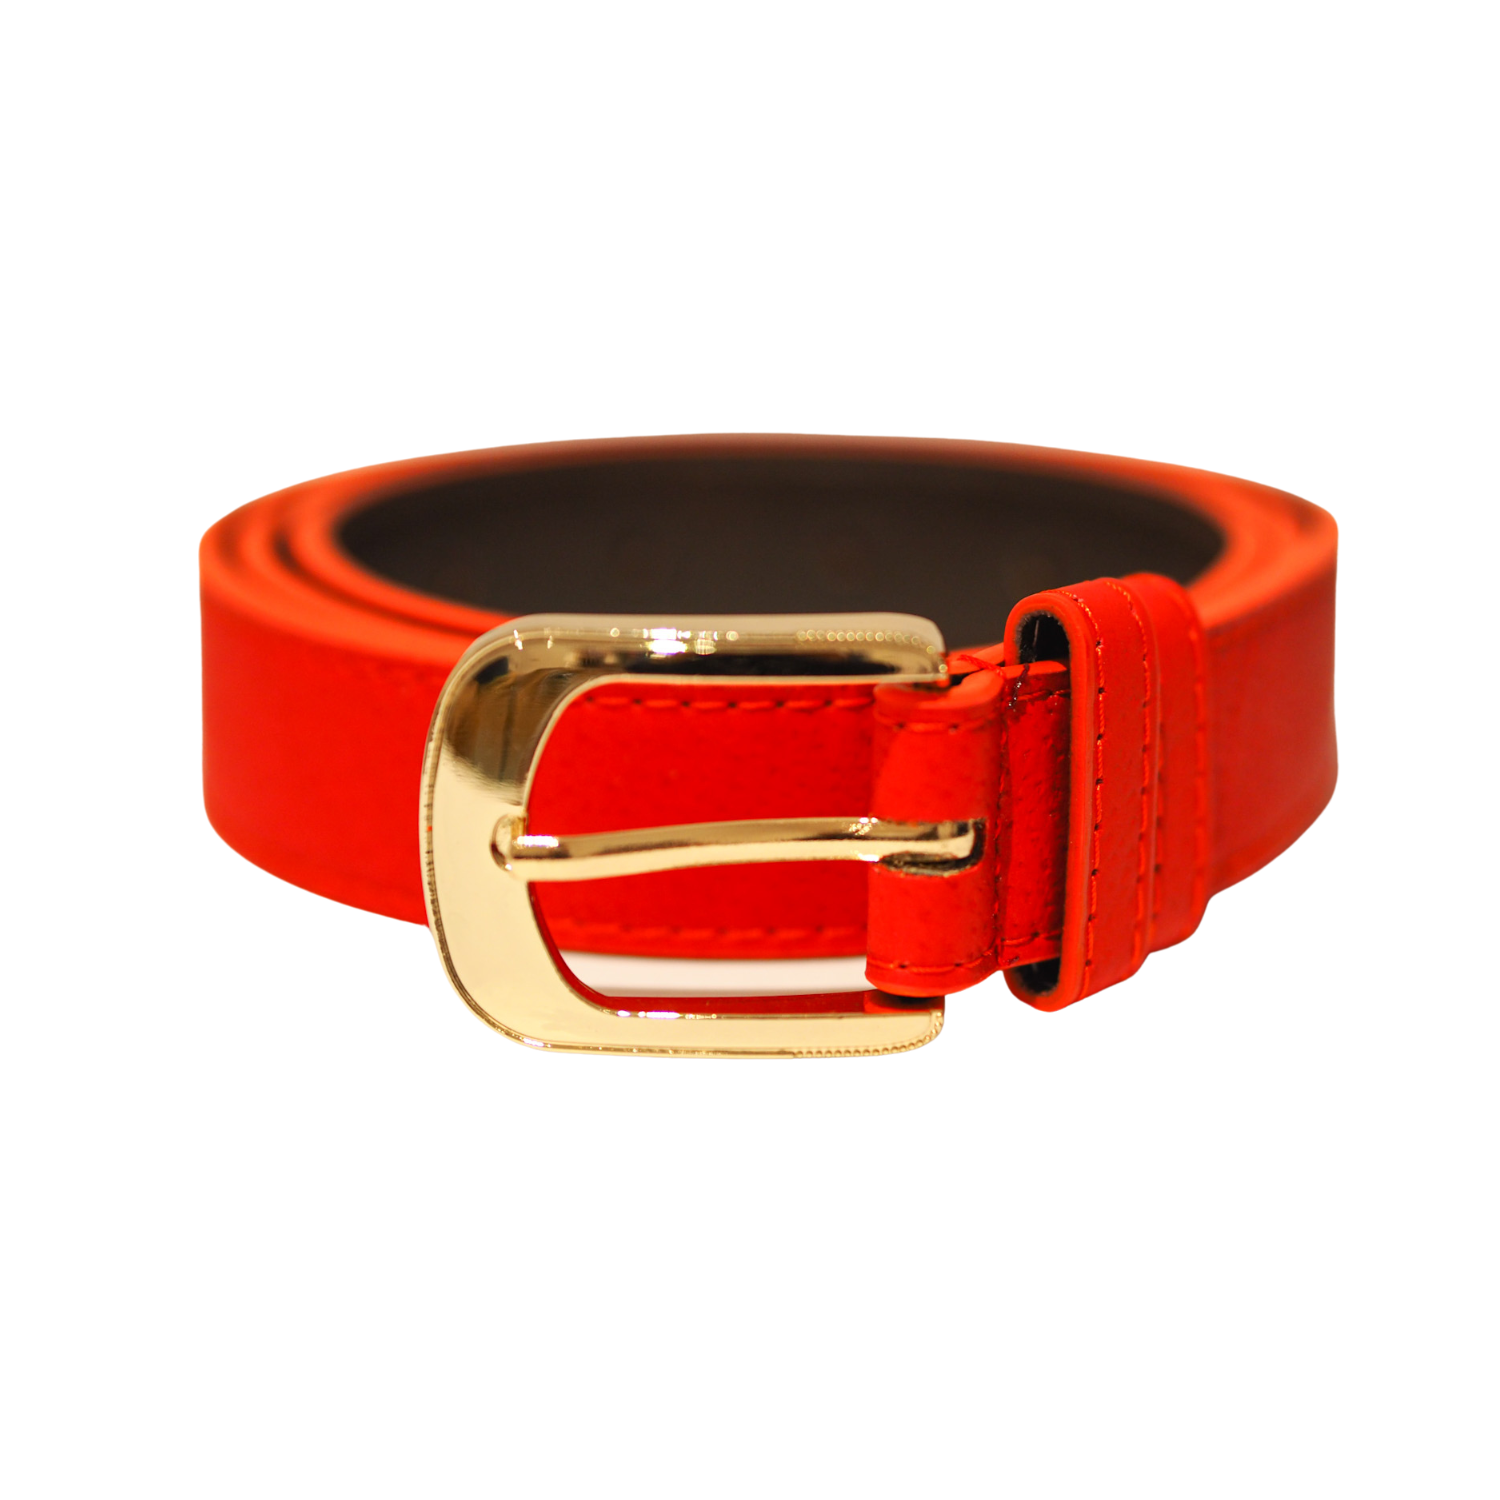 Red belt with gold buckle - faux leatherette - zalinah white london 